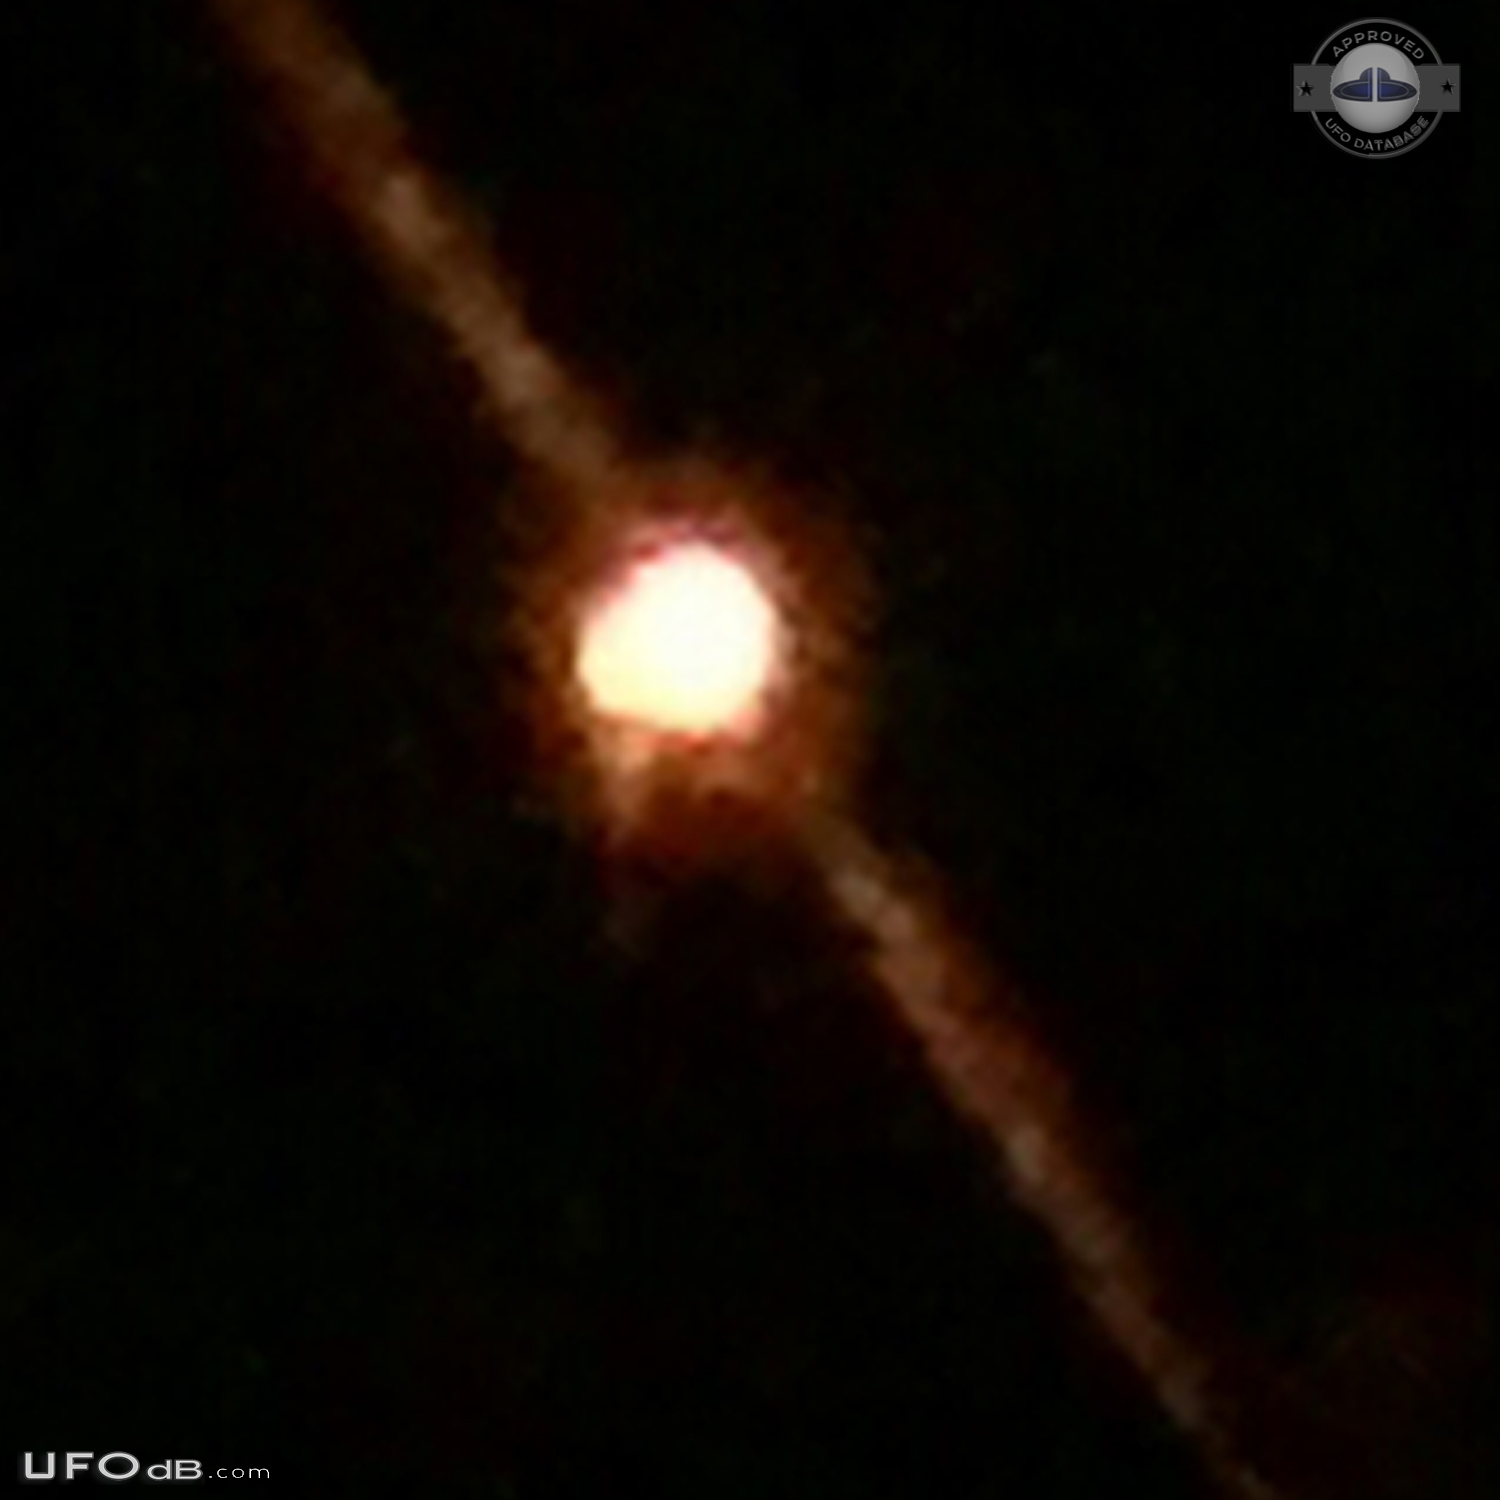 2 different UFOs - black and silhouette triangle and many orbs 2015 UFO Picture #682-6